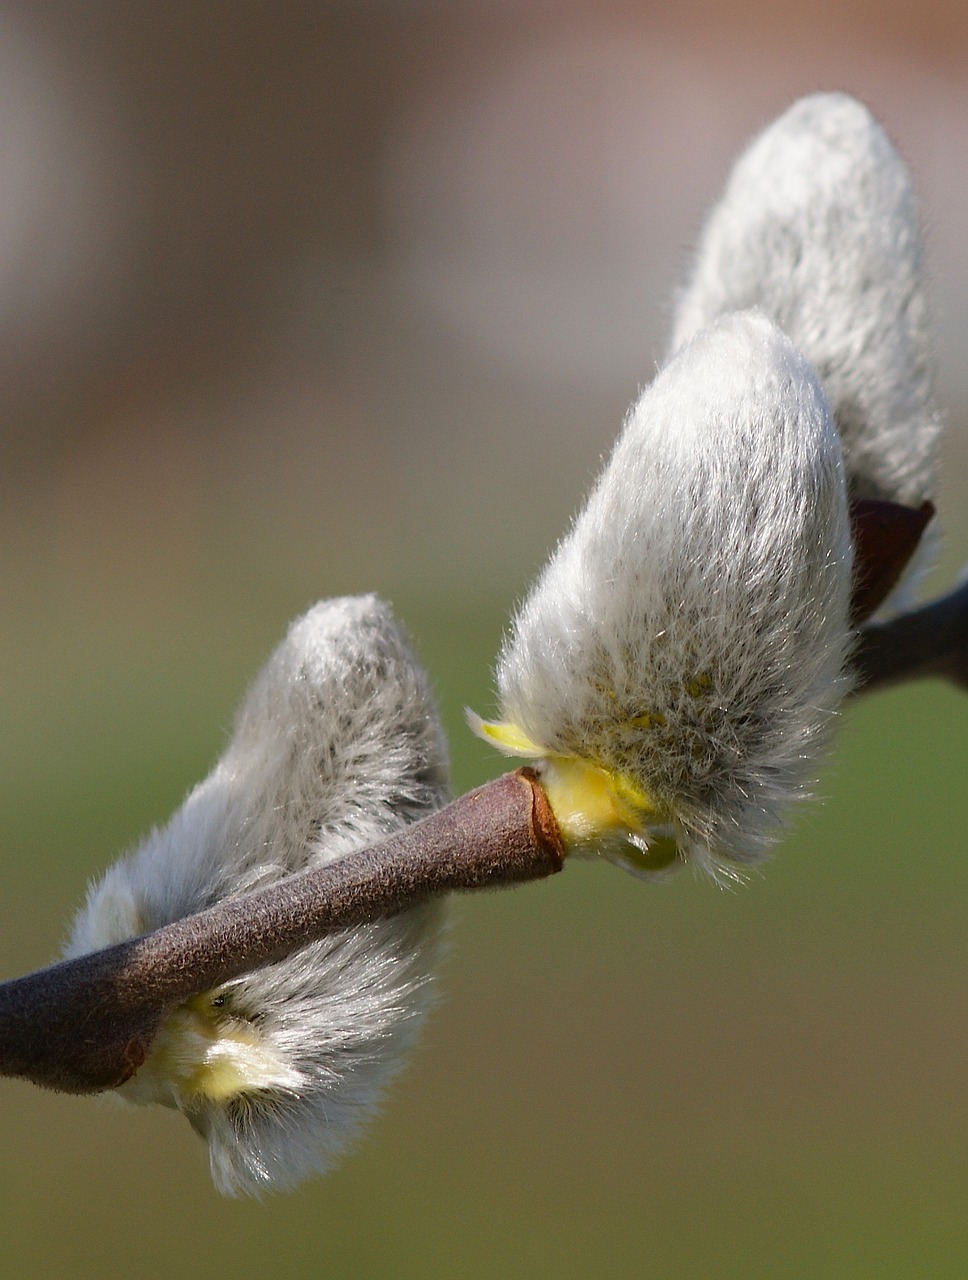 willow catkin hairy fluffy free photo